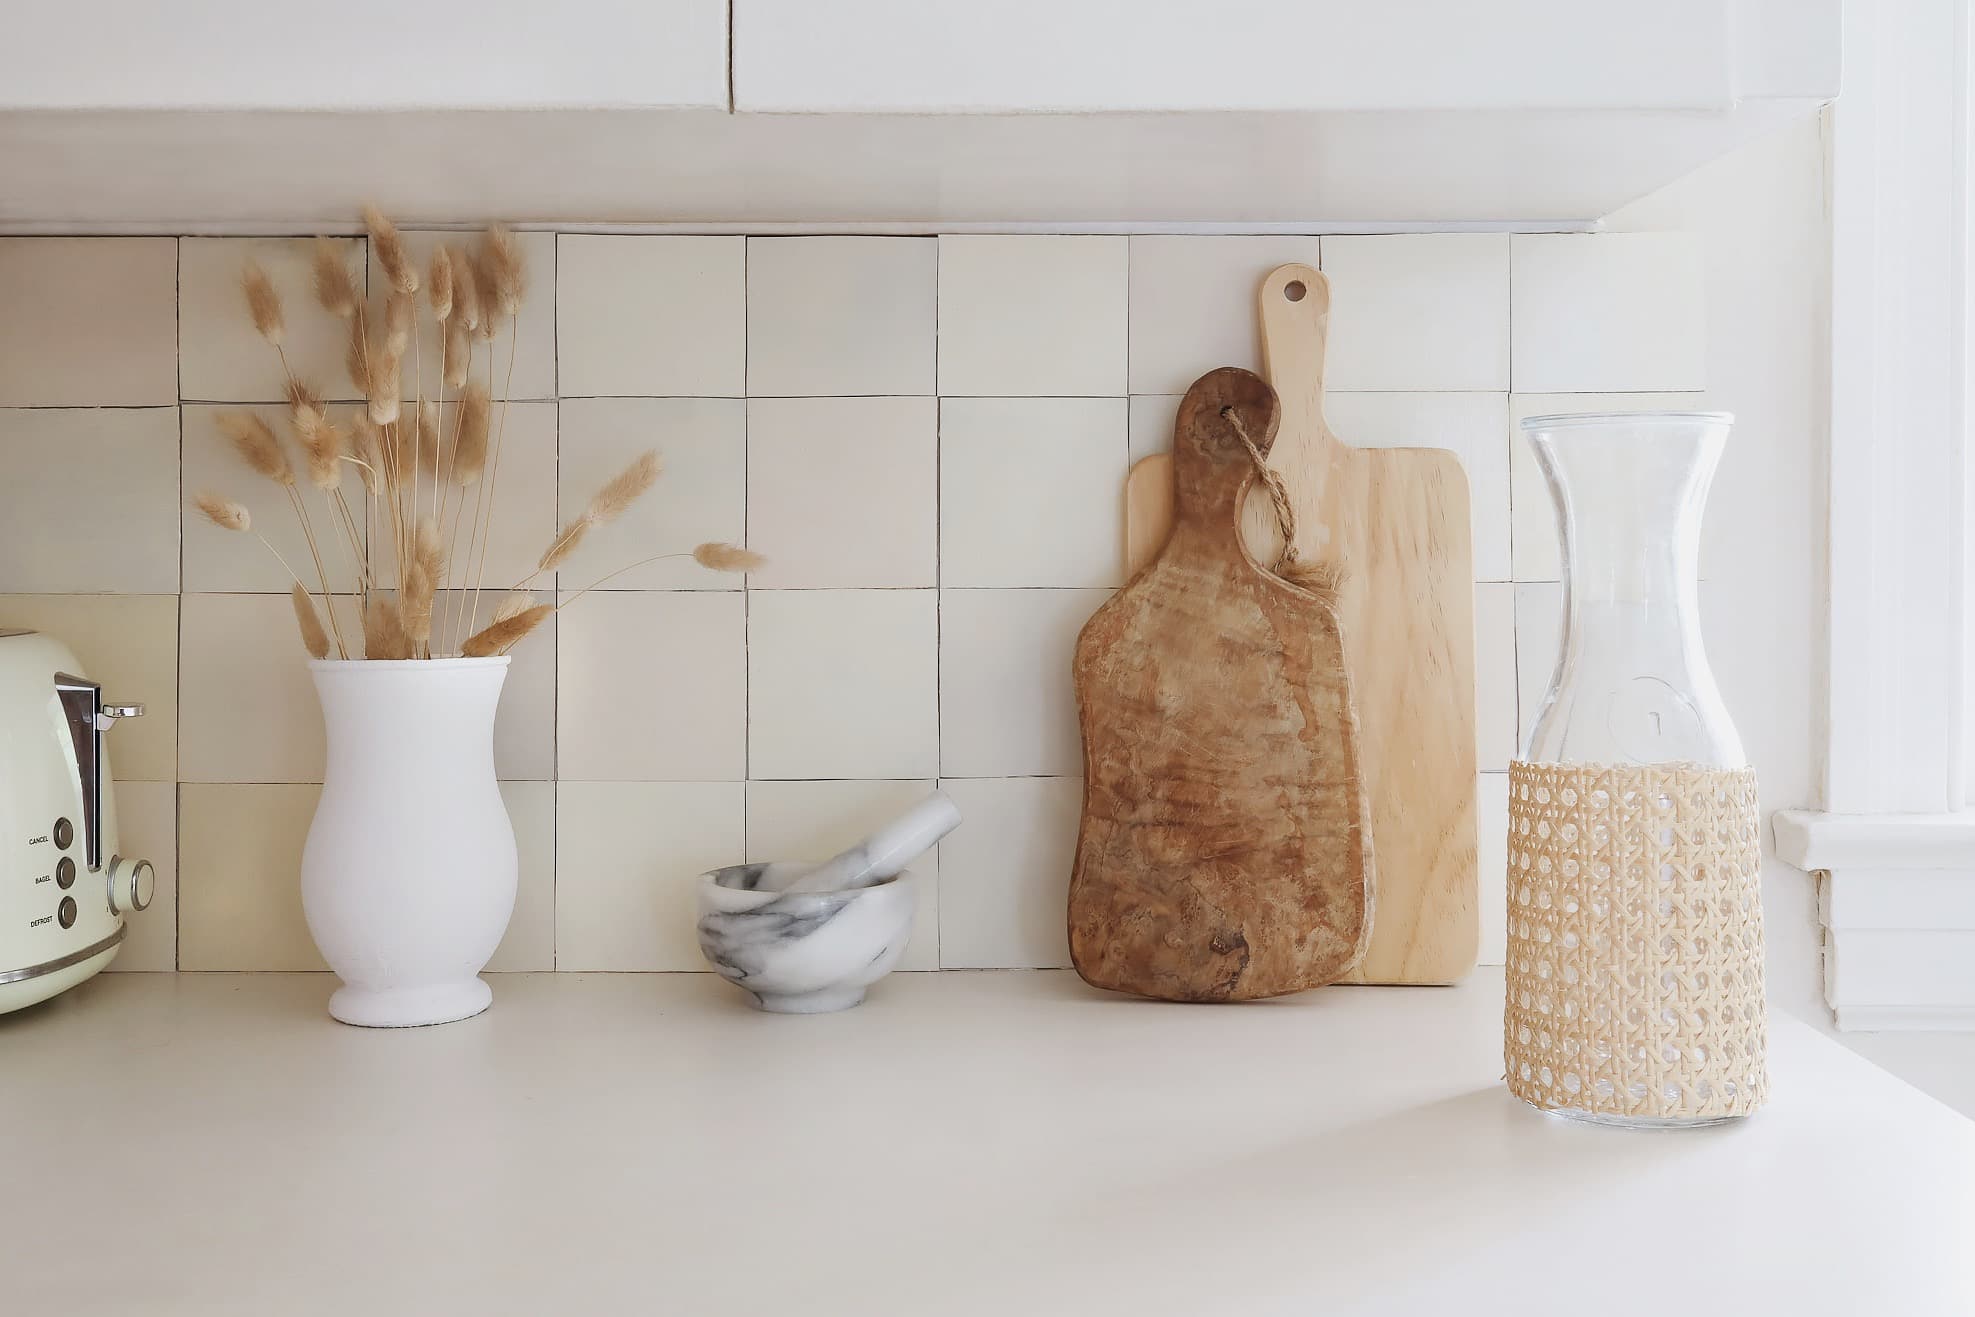 Found neutral objects in front of a creamy peel and stick kitchen backsplash